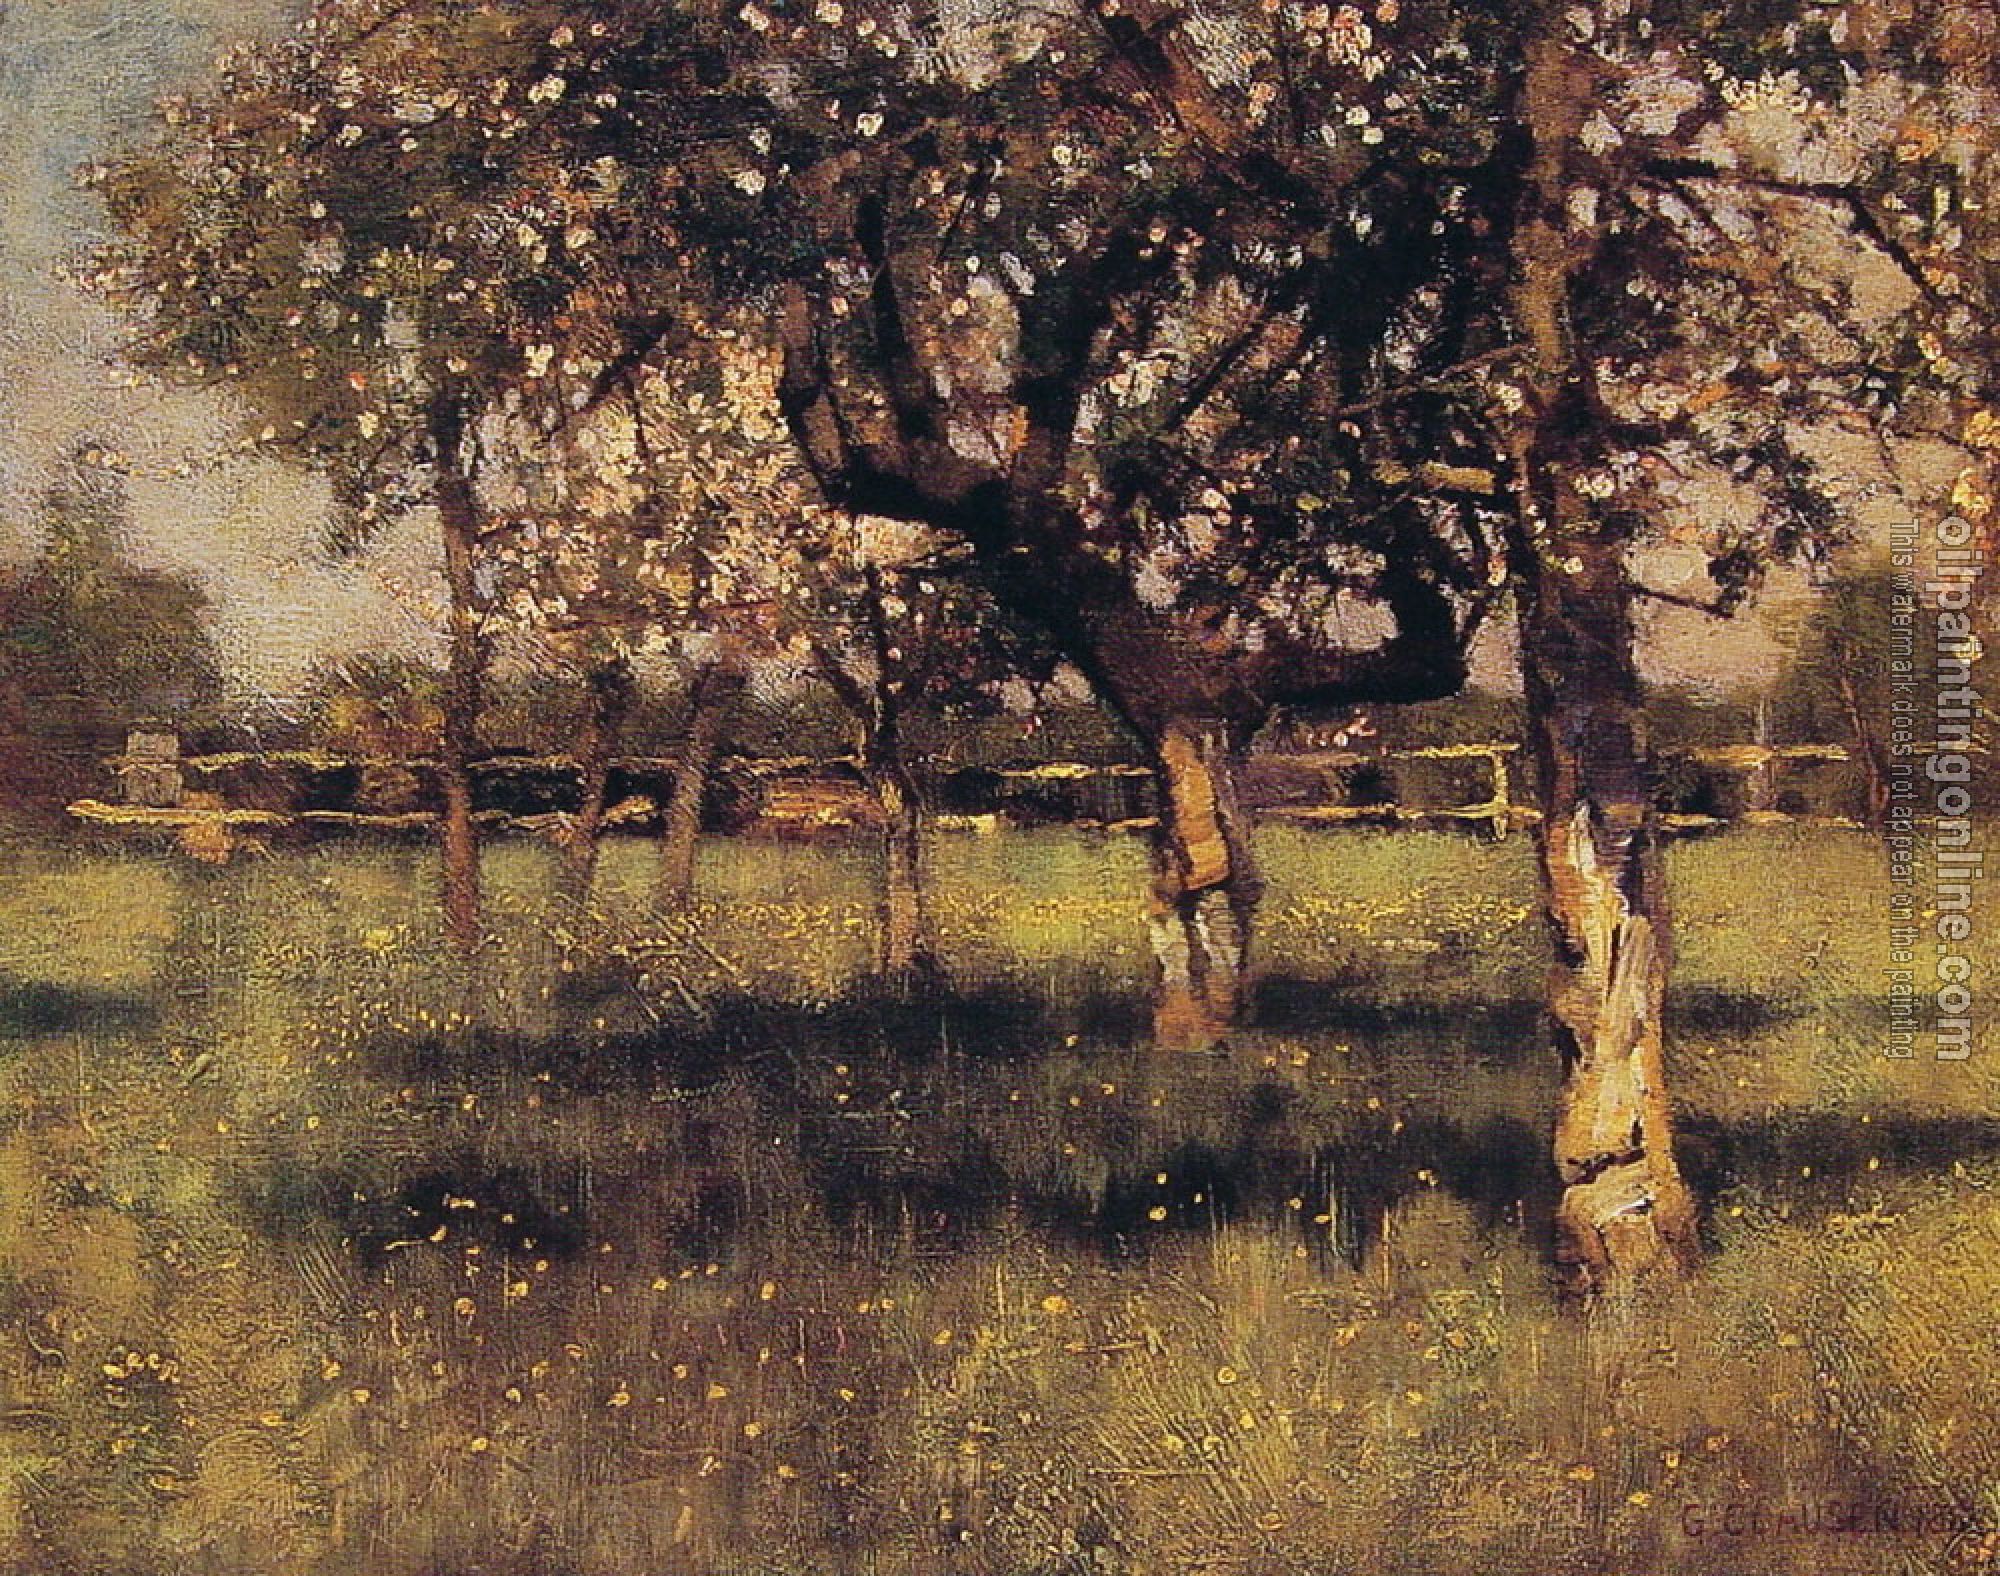 Sir George Clausen - An orchard in May